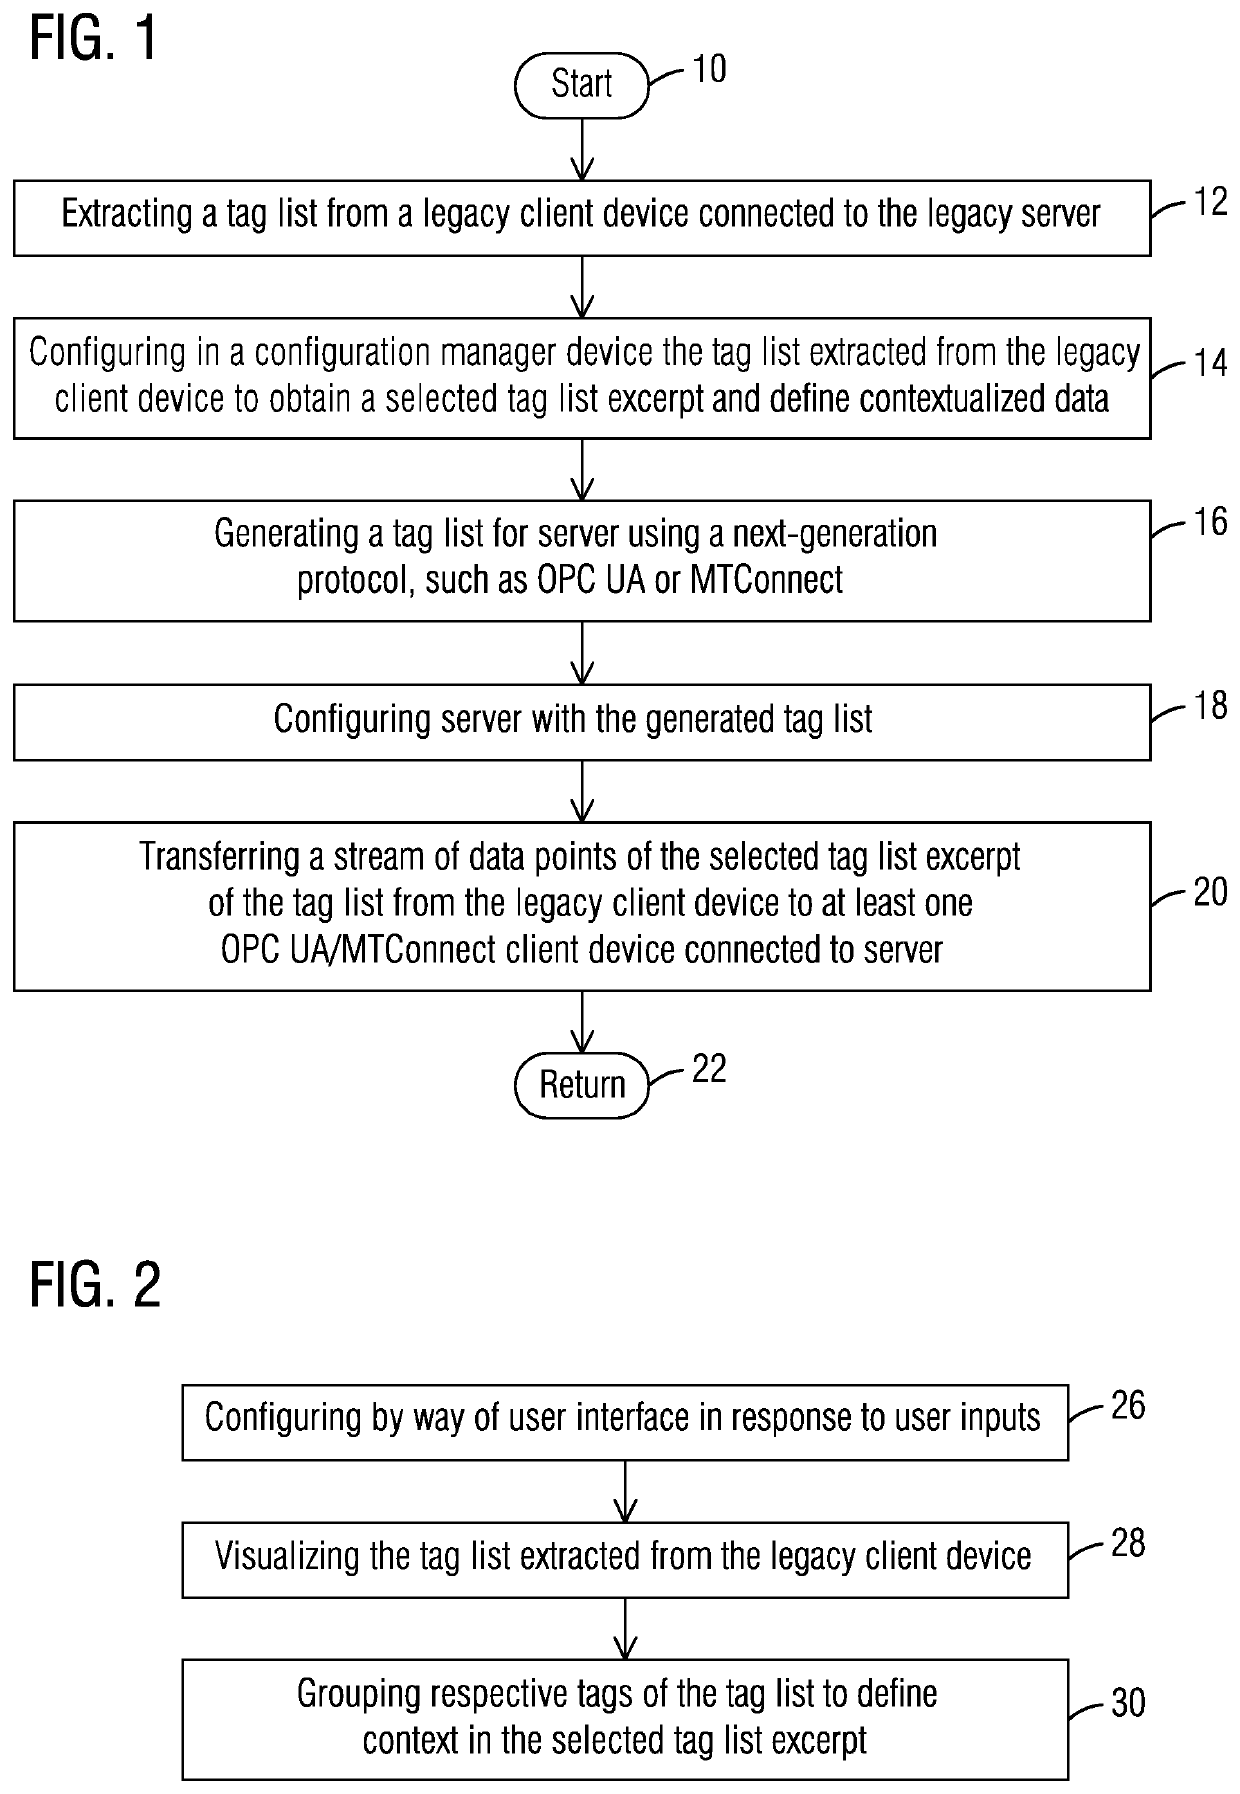 Method and apparatus for protocol translation and exchange of selectable, contextualized data between a server using a next-generation protocol and a legacy server